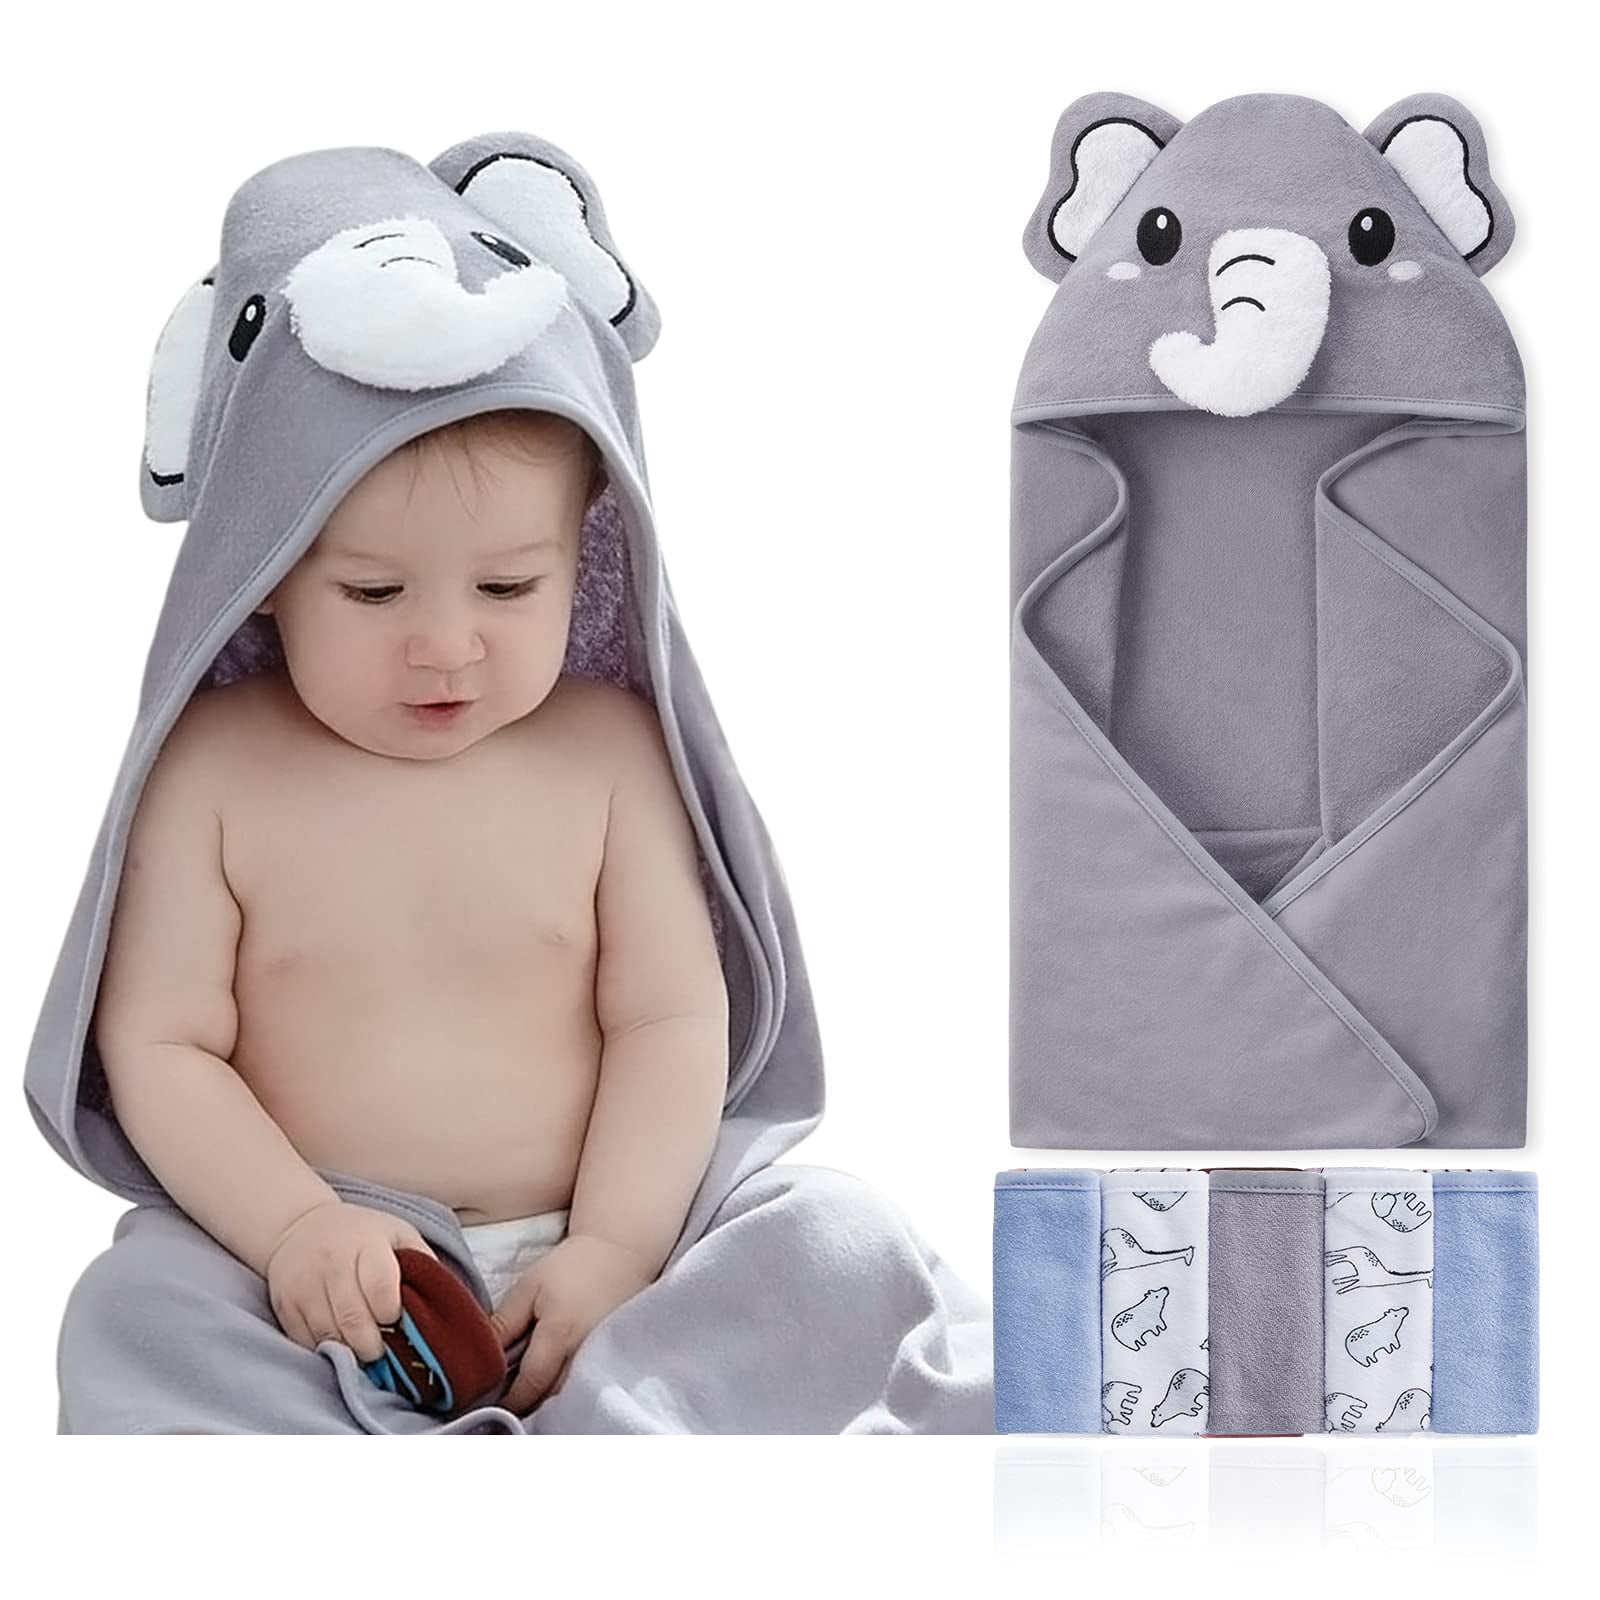 SYNPOS Hooded Baby Towels Softest Towels Toddler Thicker Hooded Bath Towel with 5 Washcloths Ultra Absorbent and Non-Balling Cotton Baby Bath Towel for Babie Unisex Baby Beach Towels Infant 